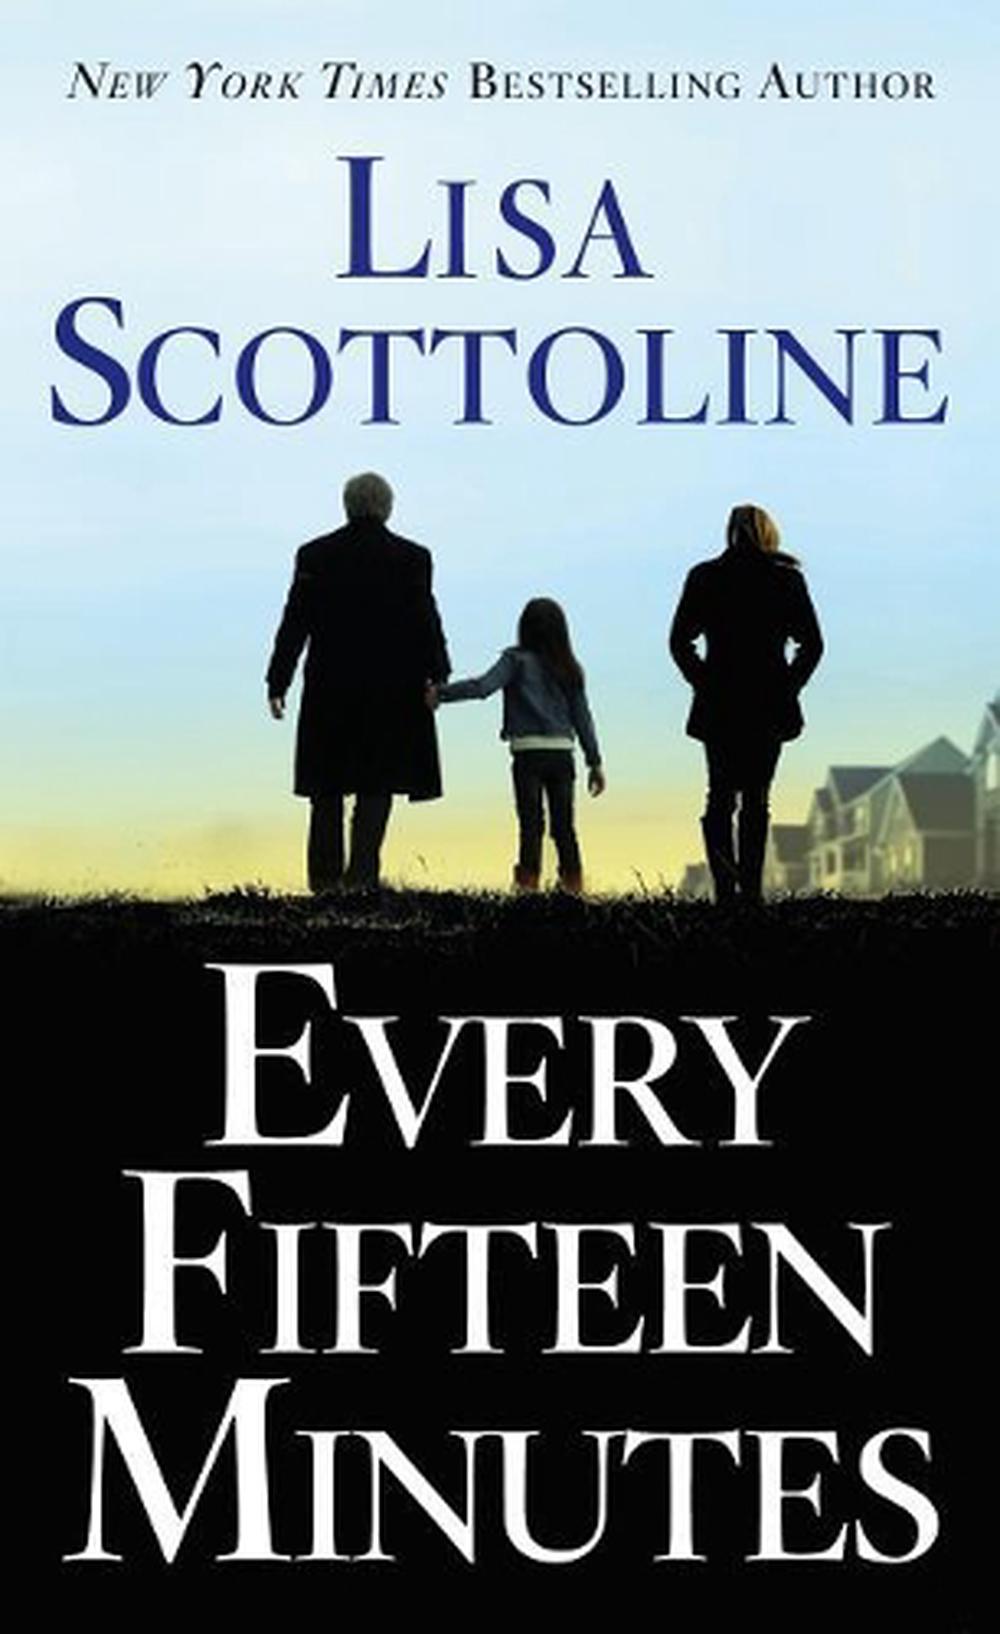 every 15 minutes scottoline